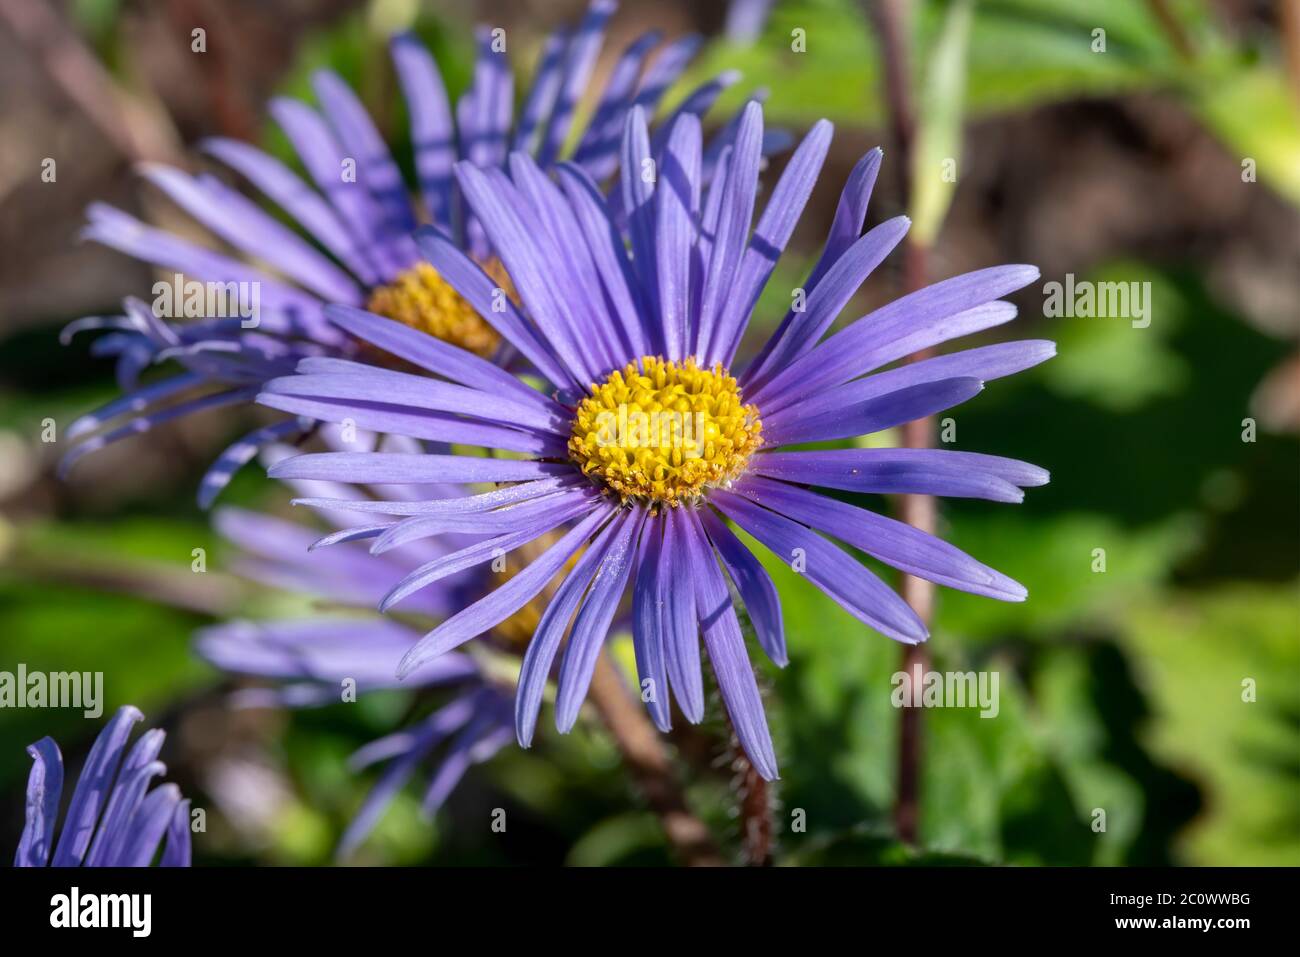 Aster peduncularis  a purple blue herbaceous summer autumn perennial flower plant commonly known as Michaelmas daisy Stock Photo